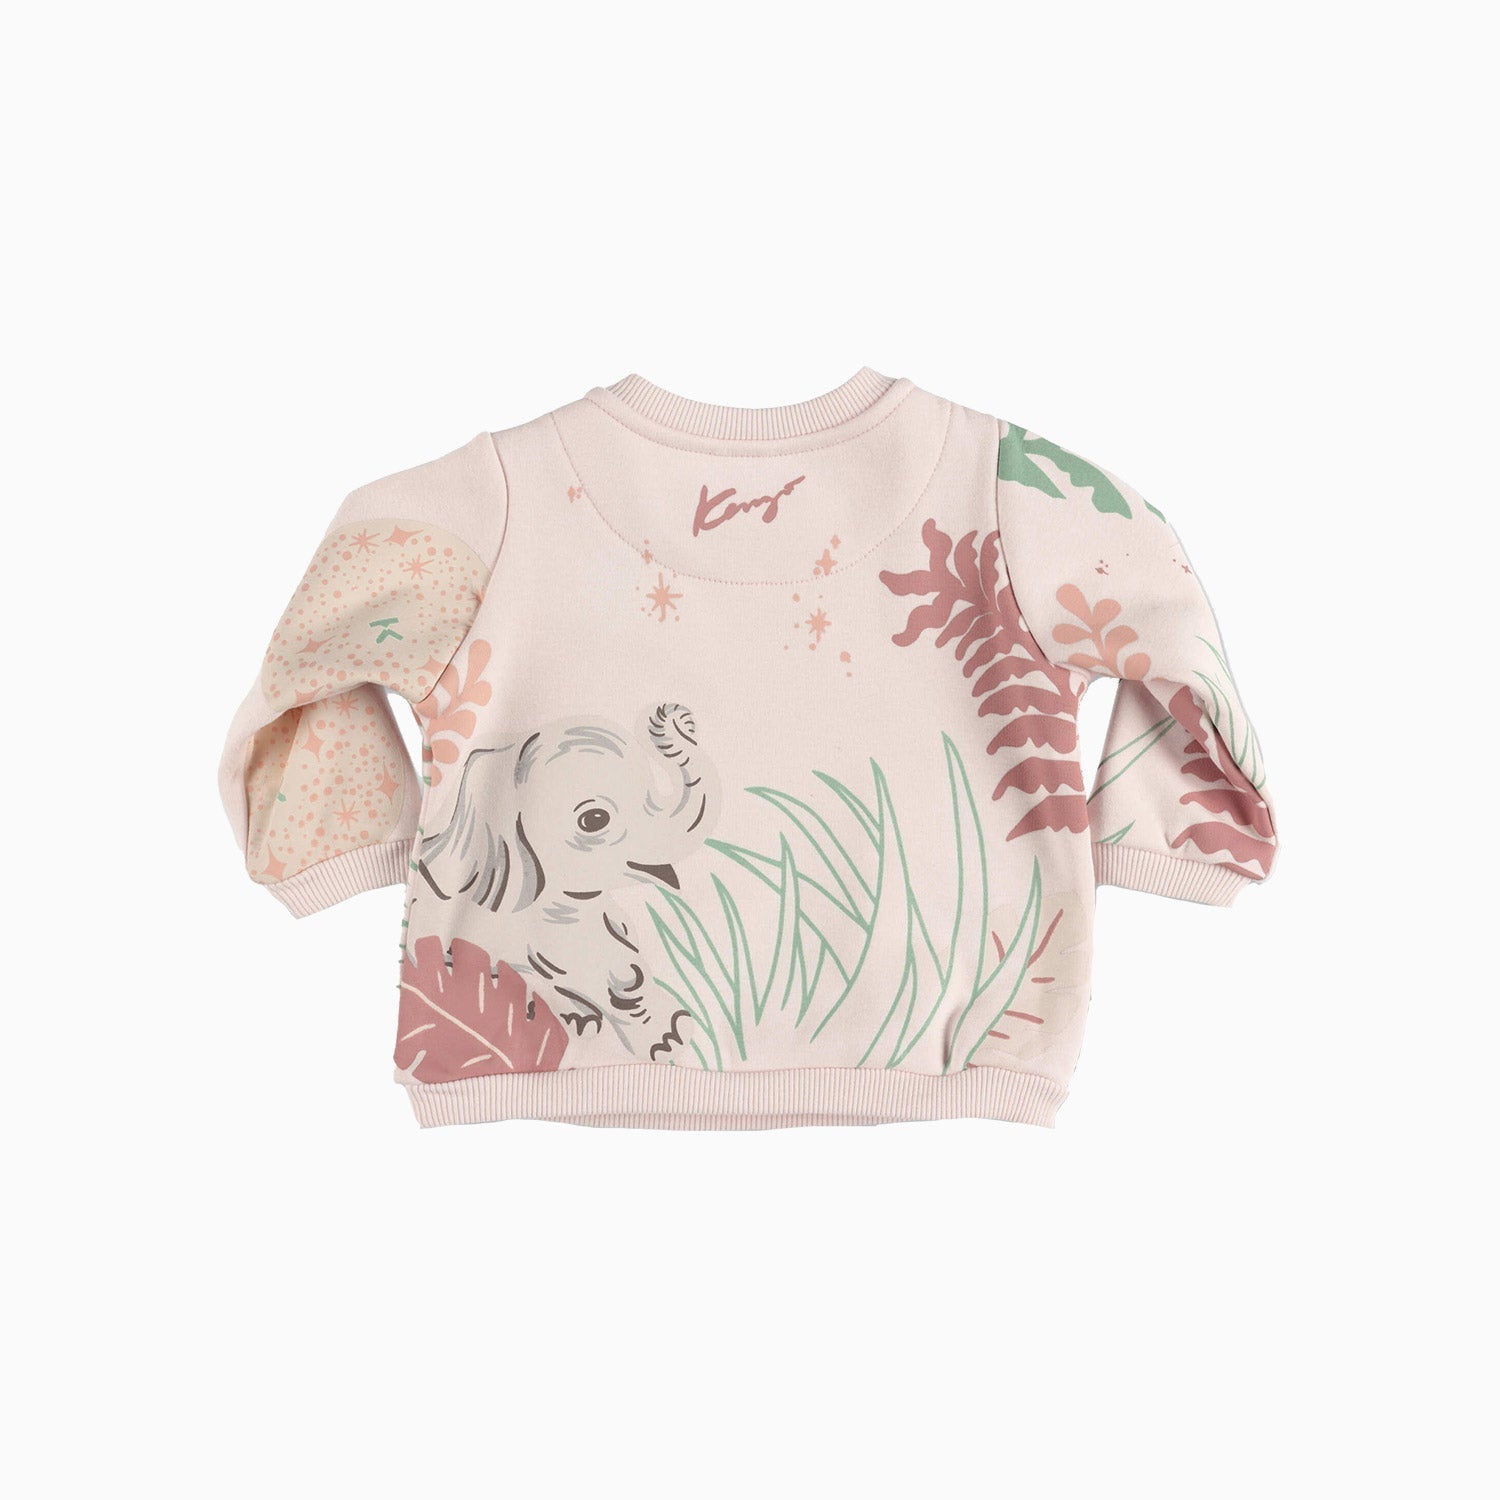 Kenzo Kid's Animal Print Outfit - Color: Pale Pink - Tops and Bottoms USA -